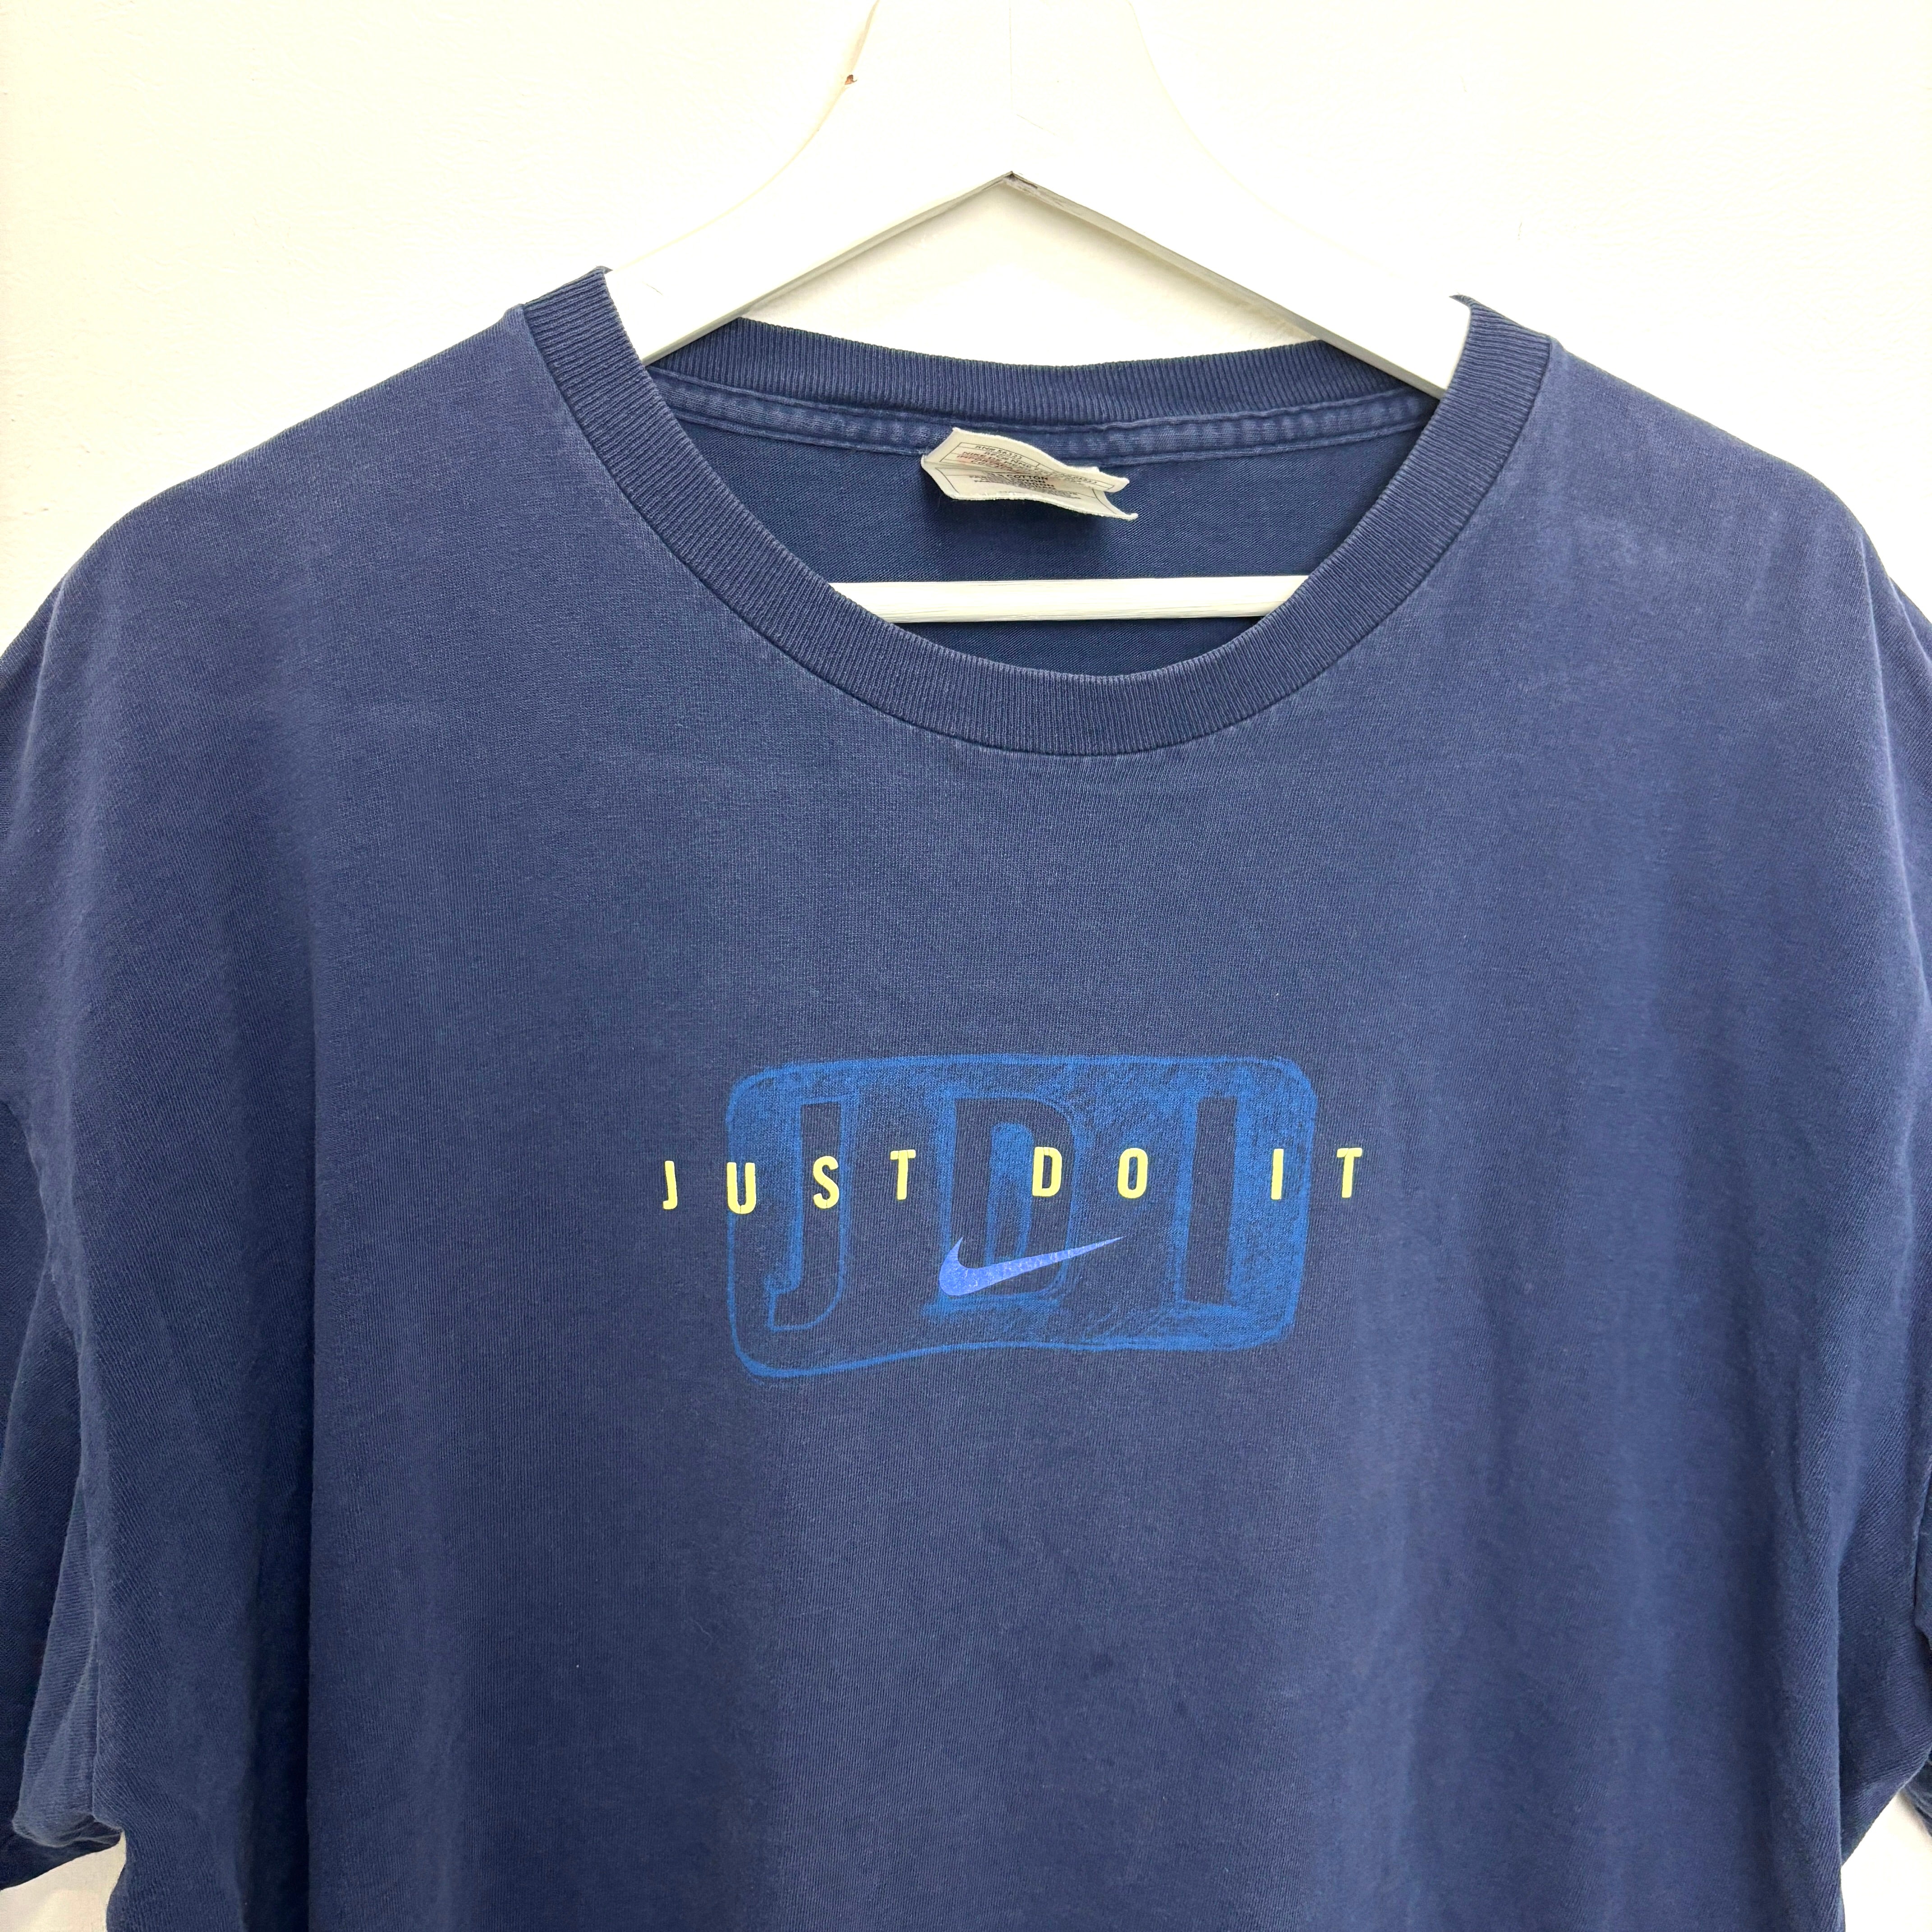 90s NIKE Navy Just Do It Graphic T-Shirt Tee